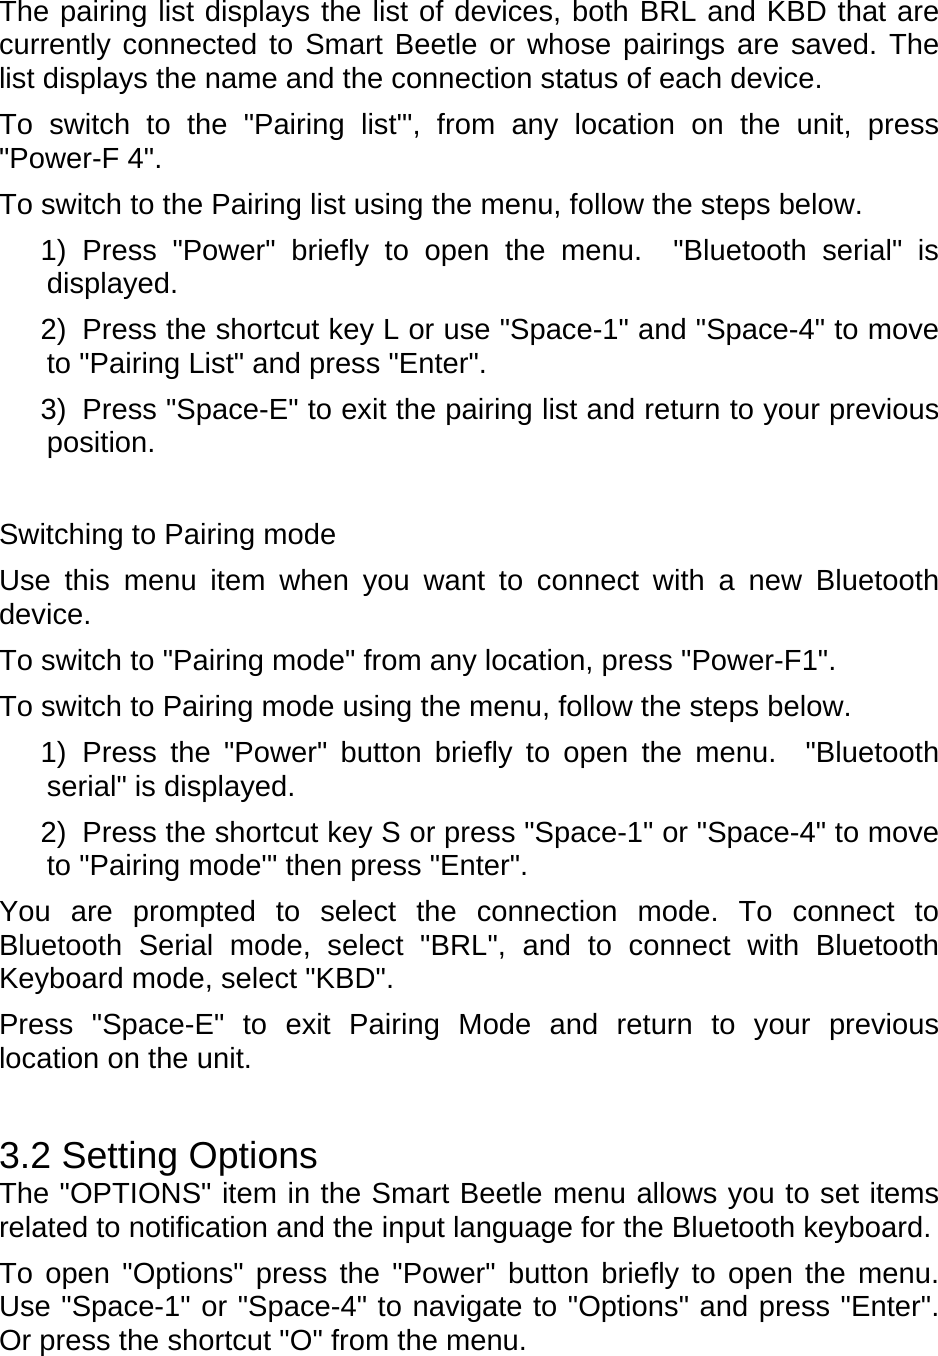 The pairing list displays the list of devices, both BRL and KBD that are currently connected to Smart Beetle or whose pairings are saved. The list displays the name and the connection status of each device.   To switch to the &quot;Pairing list&apos;&quot;, from any location on the unit, press &quot;Power-F 4&quot;.     To switch to the Pairing list using the menu, follow the steps below.   1) Press &quot;Power&quot; briefly to open the menu.  &quot;Bluetooth serial&quot; is displayed. 2)  Press the shortcut key L or use &quot;Space-1&quot; and &quot;Space-4&quot; to move to &quot;Pairing List&quot; and press &quot;Enter&quot;. 3)  Press &quot;Space-E&quot; to exit the pairing list and return to your previous position.   Switching to Pairing mode Use this menu item when you want to connect with a new Bluetooth device.  To switch to &quot;Pairing mode&quot; from any location, press &quot;Power-F1&quot;.     To switch to Pairing mode using the menu, follow the steps below.   1) Press the &quot;Power&quot; button briefly to open the menu.  &quot;Bluetooth serial&quot; is displayed. 2)  Press the shortcut key S or press &quot;Space-1&quot; or &quot;Space-4&quot; to move to &quot;Pairing mode&apos;&quot; then press &quot;Enter&quot;. You are prompted to select the connection mode. To connect to Bluetooth Serial mode, select &quot;BRL&quot;, and to connect with Bluetooth Keyboard mode, select &quot;KBD&quot;.   Press &quot;Space-E&quot; to exit Pairing Mode and return to your previous location on the unit.  3.2 Setting Options The &quot;OPTIONS&quot; item in the Smart Beetle menu allows you to set items related to notification and the input language for the Bluetooth keyboard.   To open &quot;Options&quot; press the &quot;Power&quot; button briefly to open the menu. Use &quot;Space-1&quot; or &quot;Space-4&quot; to navigate to &quot;Options&quot; and press &quot;Enter&quot;. Or press the shortcut &quot;O&quot; from the menu. 